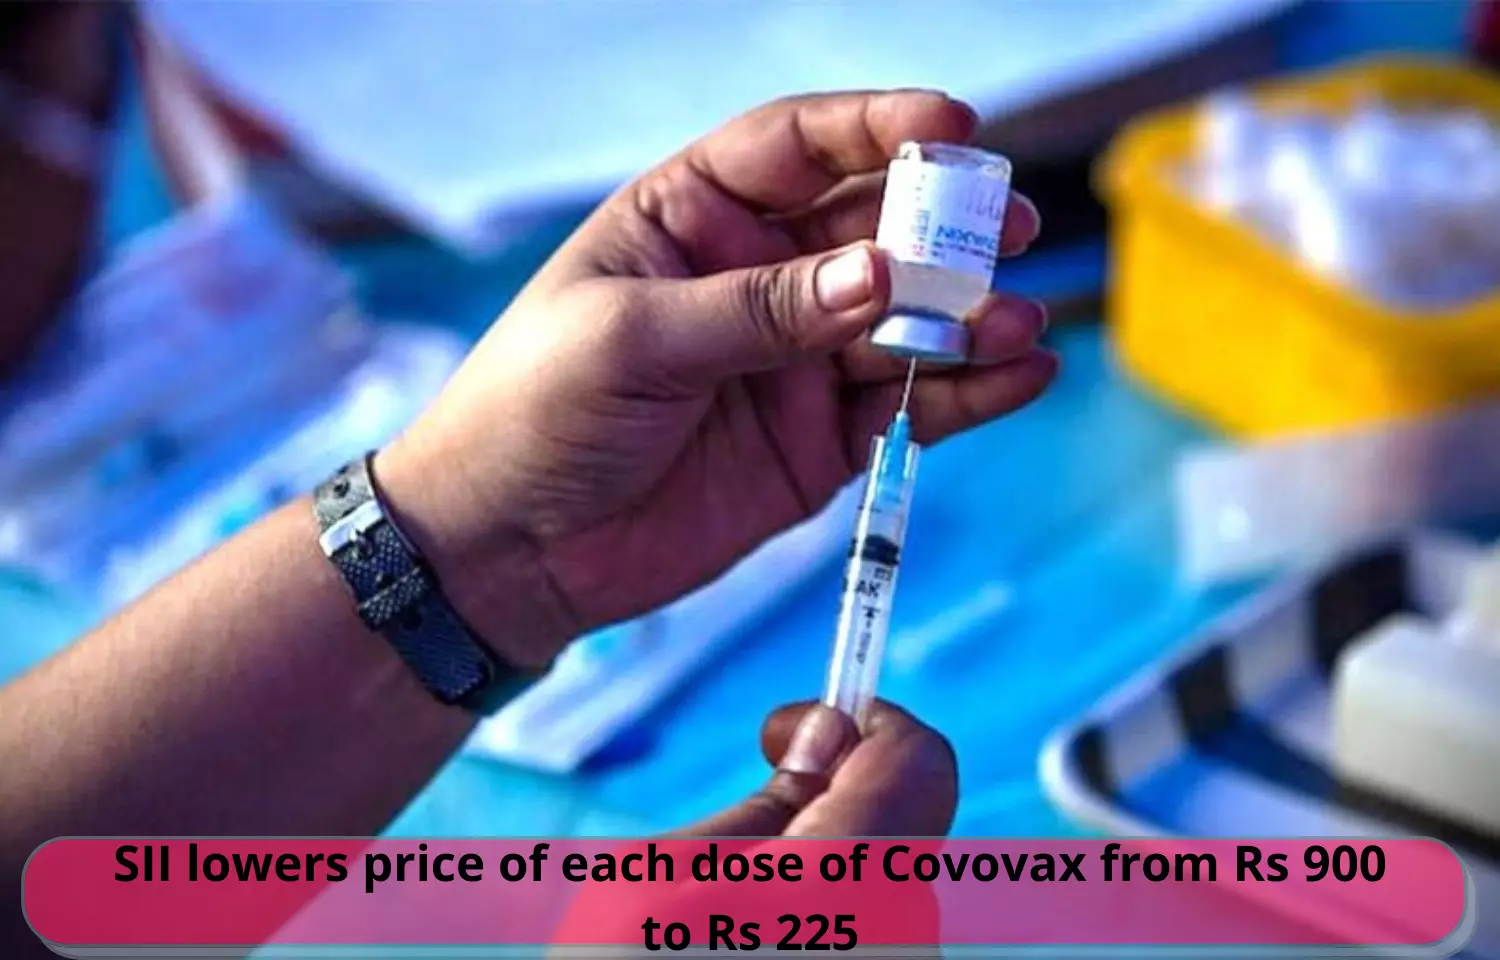 Serum Institute Covovax price slashed to Rs 225 Per Dose